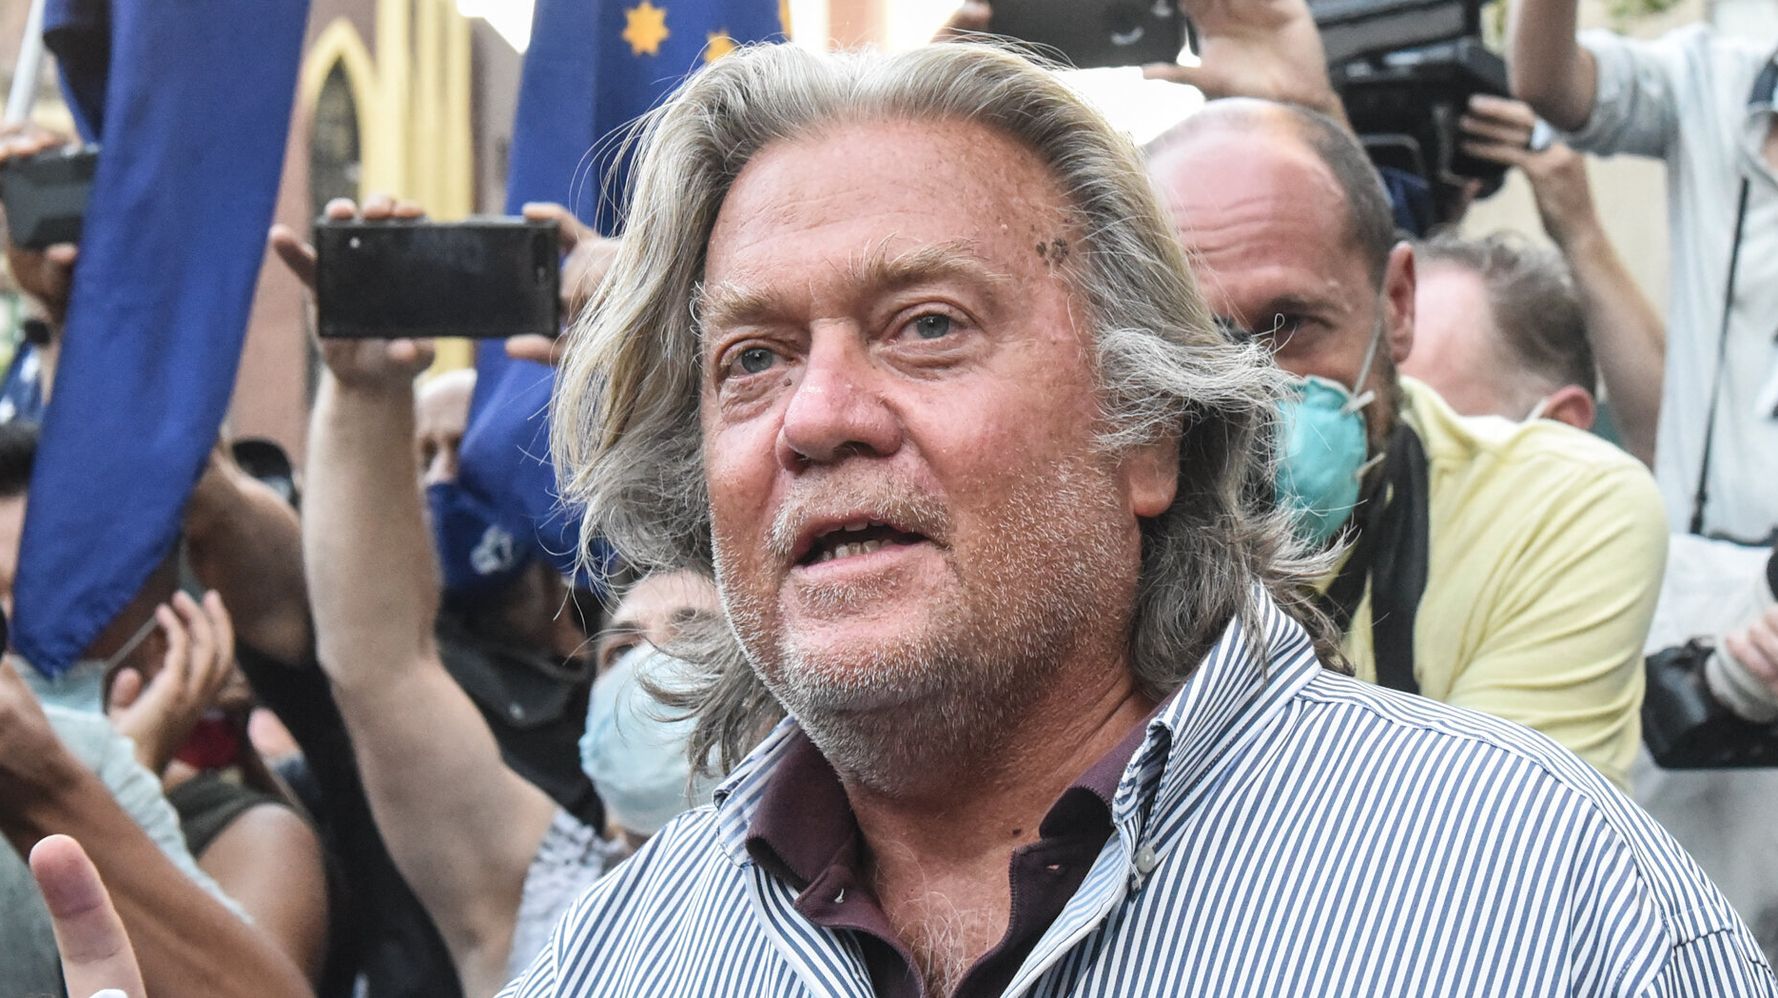 Bannon Indicted On Contempt Charges For Defying 1/6 Subpoena